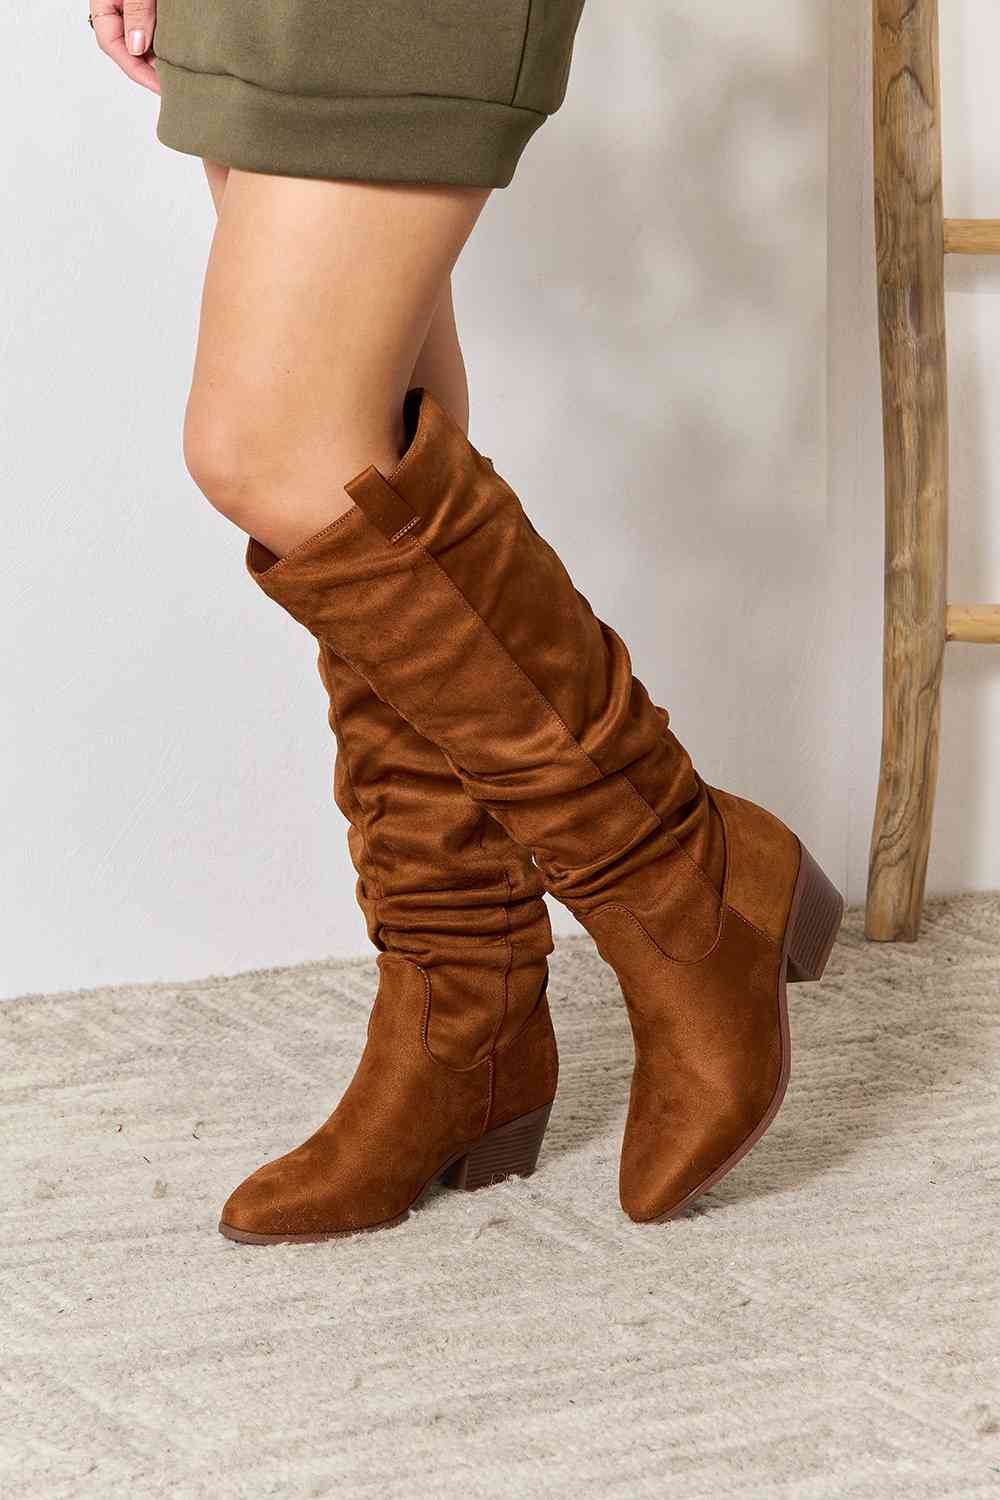 Sleek knee-high boots for women, Contemporary heeled winter boots, Versatile knee boots with high heels, Chic women's footwear with knee-high heels